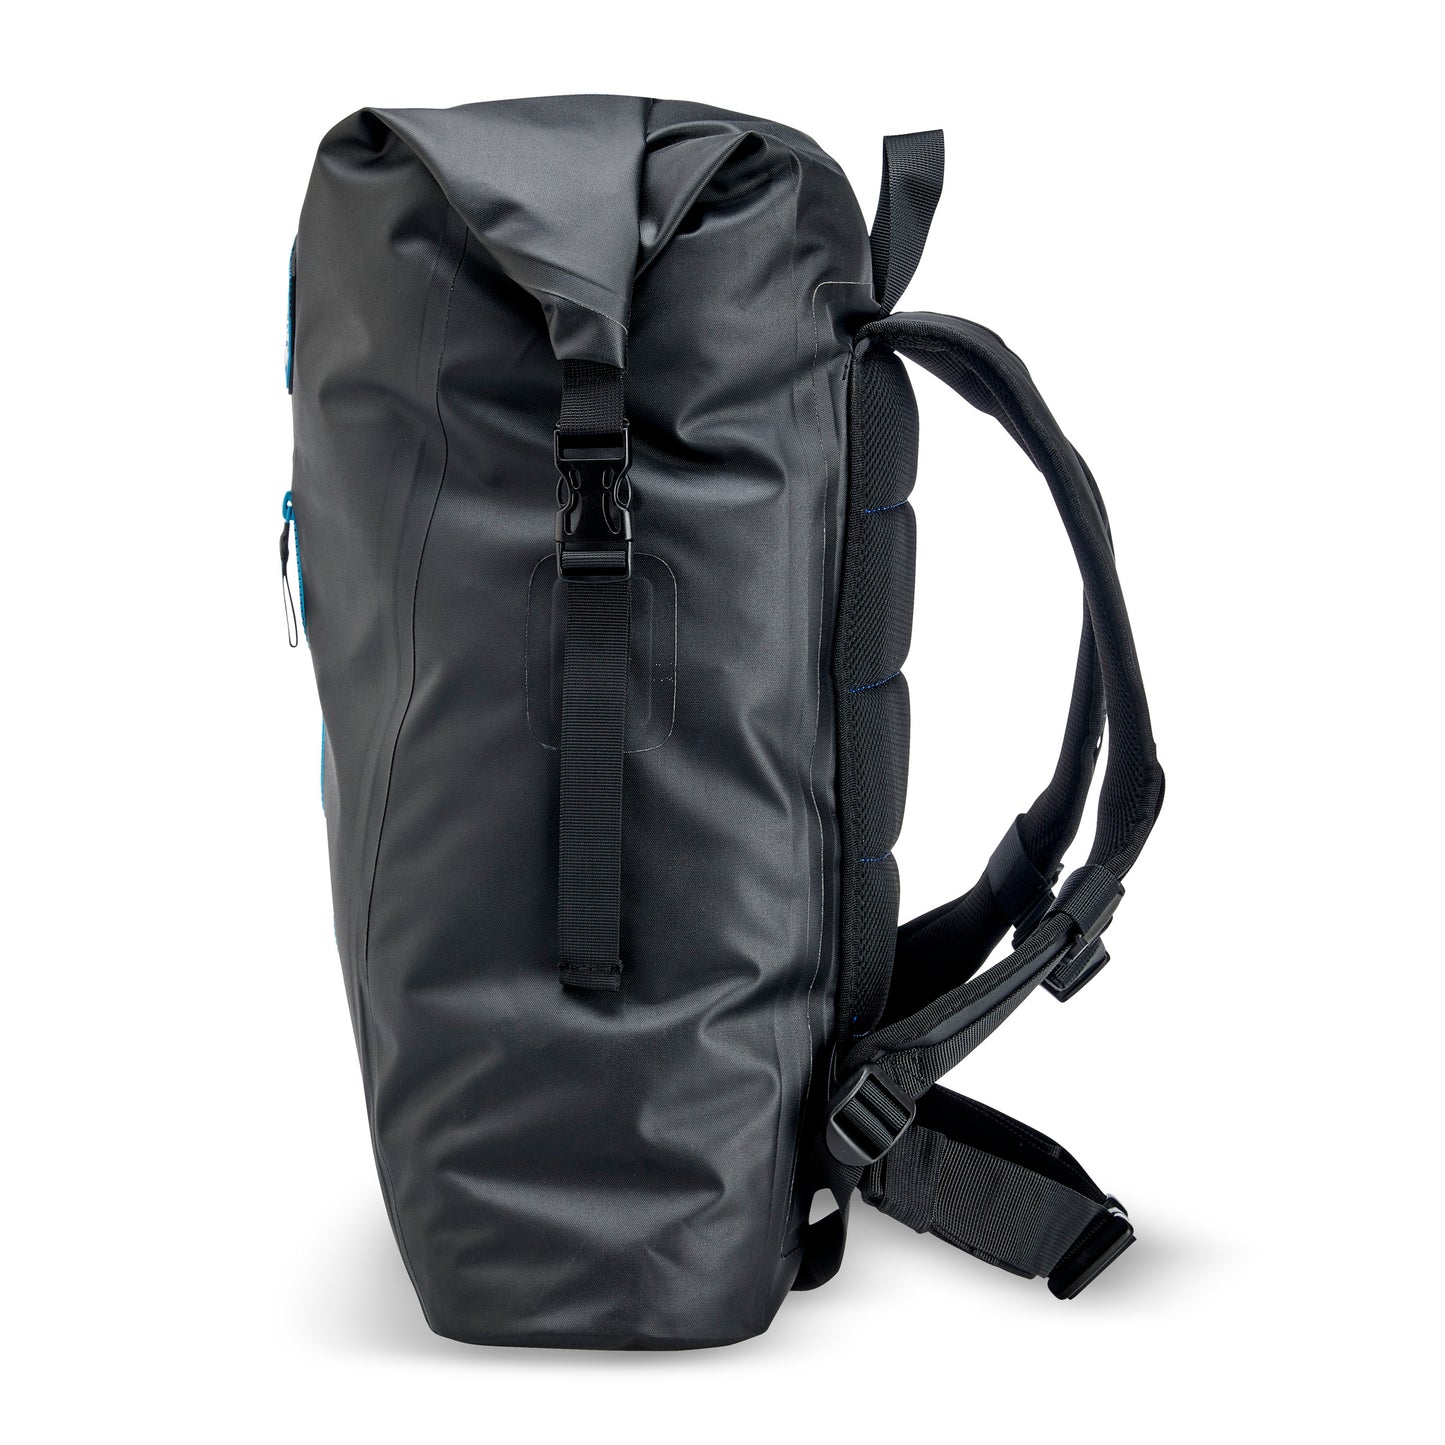 Overboard Dry Bag